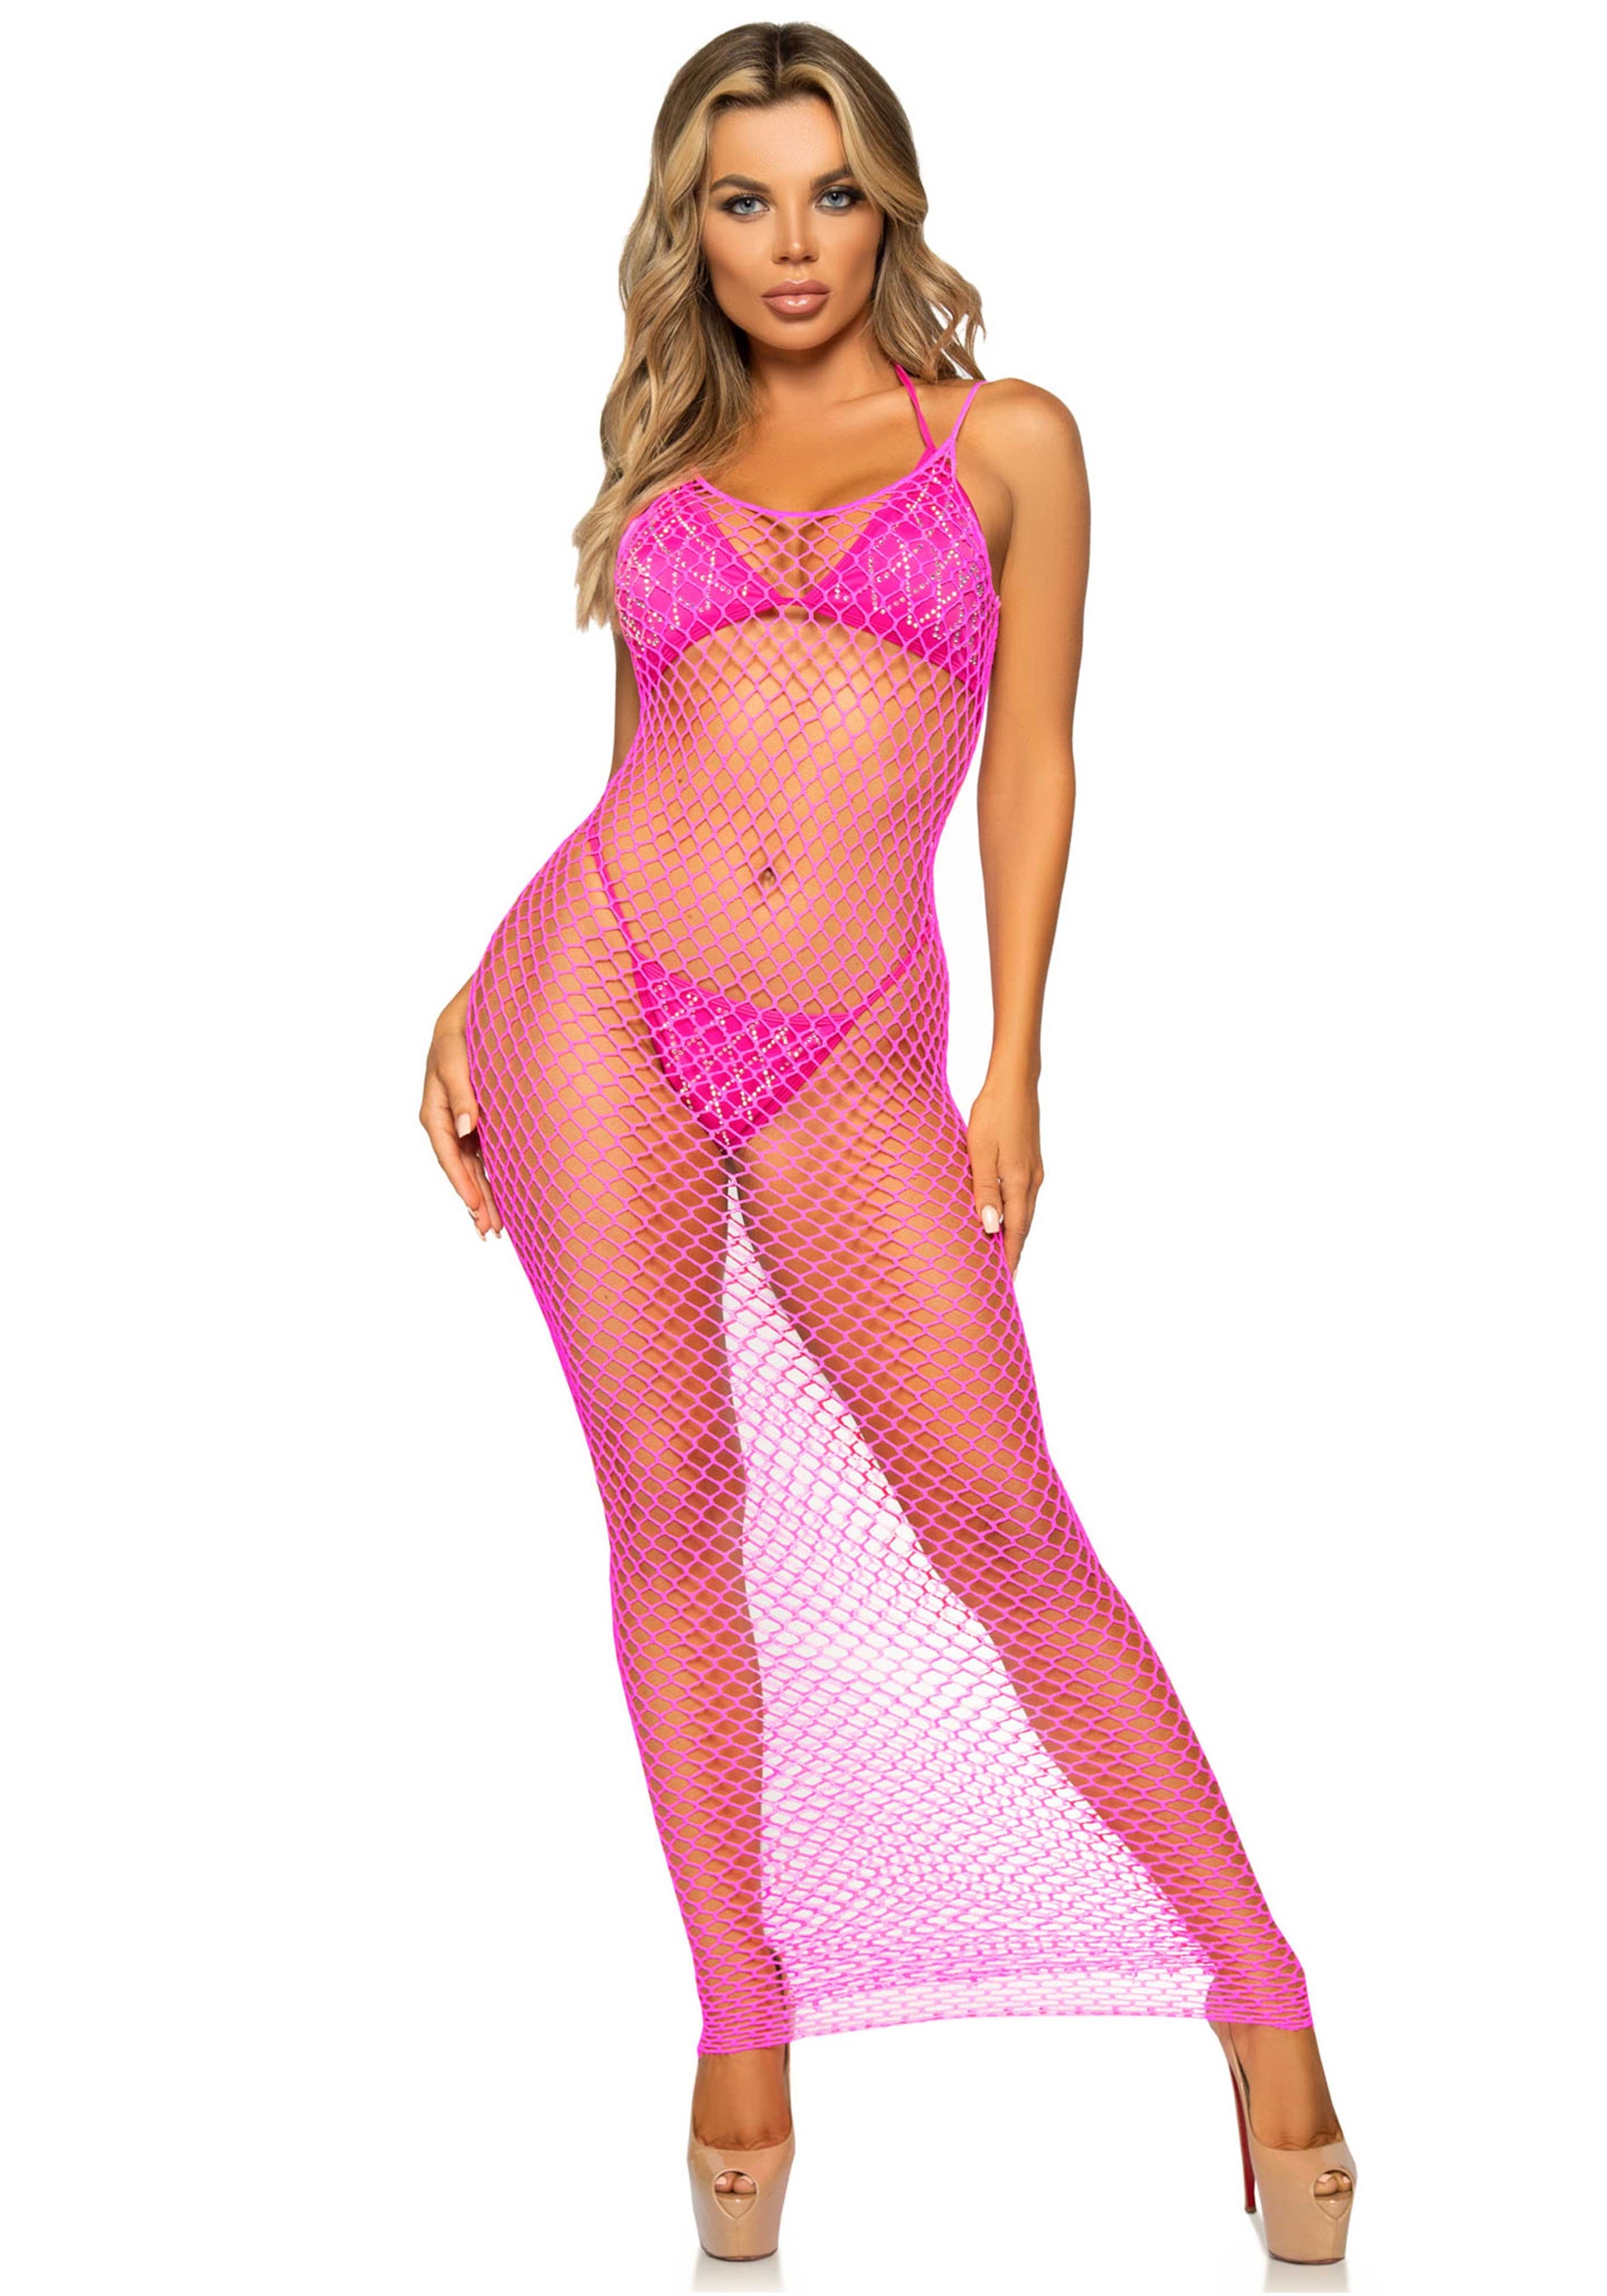 Leg Avenue 86963 Fishnet Dress - Neon Pink woven thick twist net maxi dress with elasticated straps and low back. Perfect for layering with beachwear or for festivals.